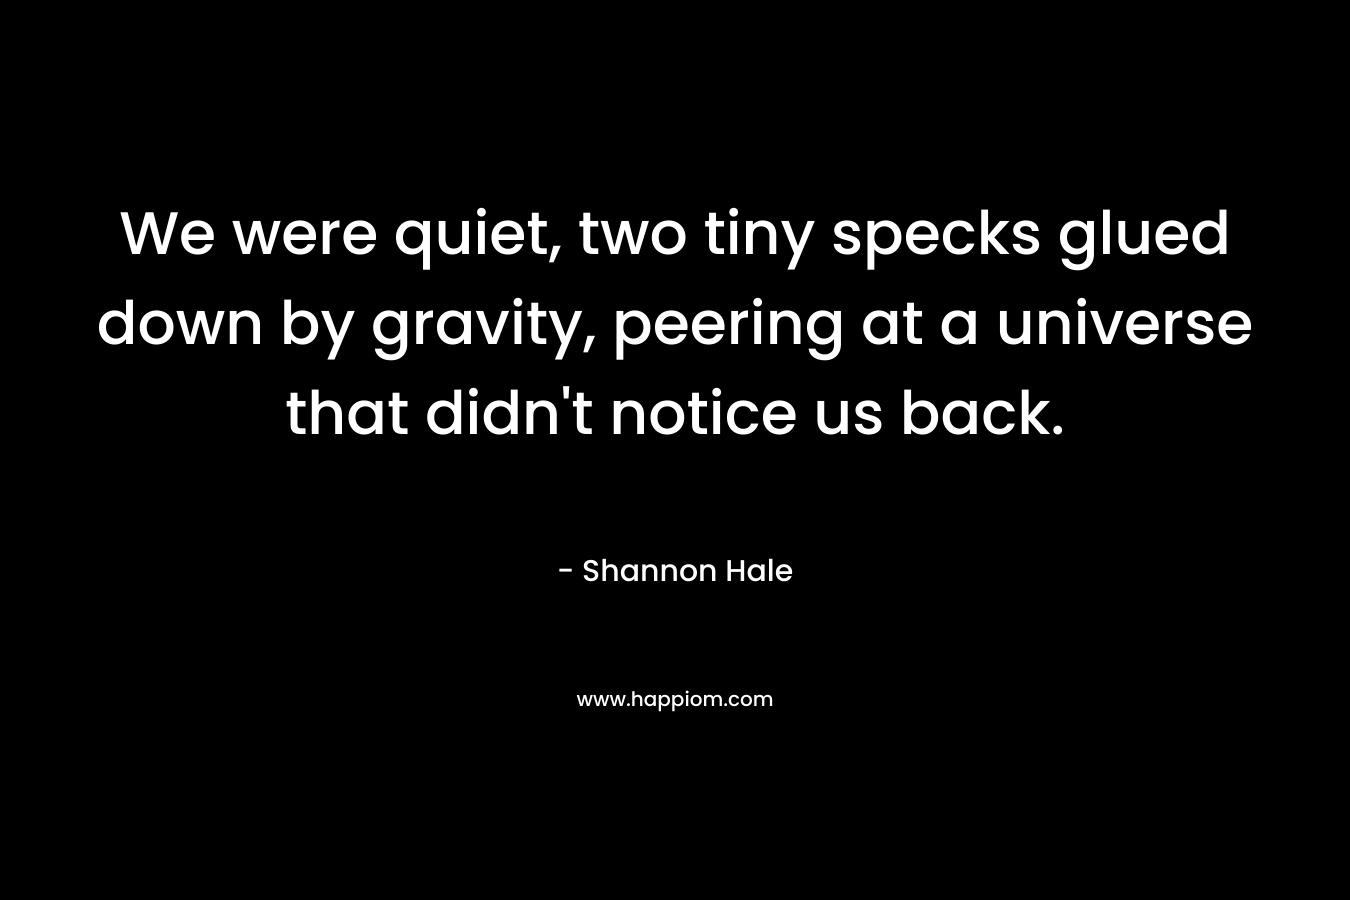 We were quiet, two tiny specks glued down by gravity, peering at a universe that didn't notice us back.